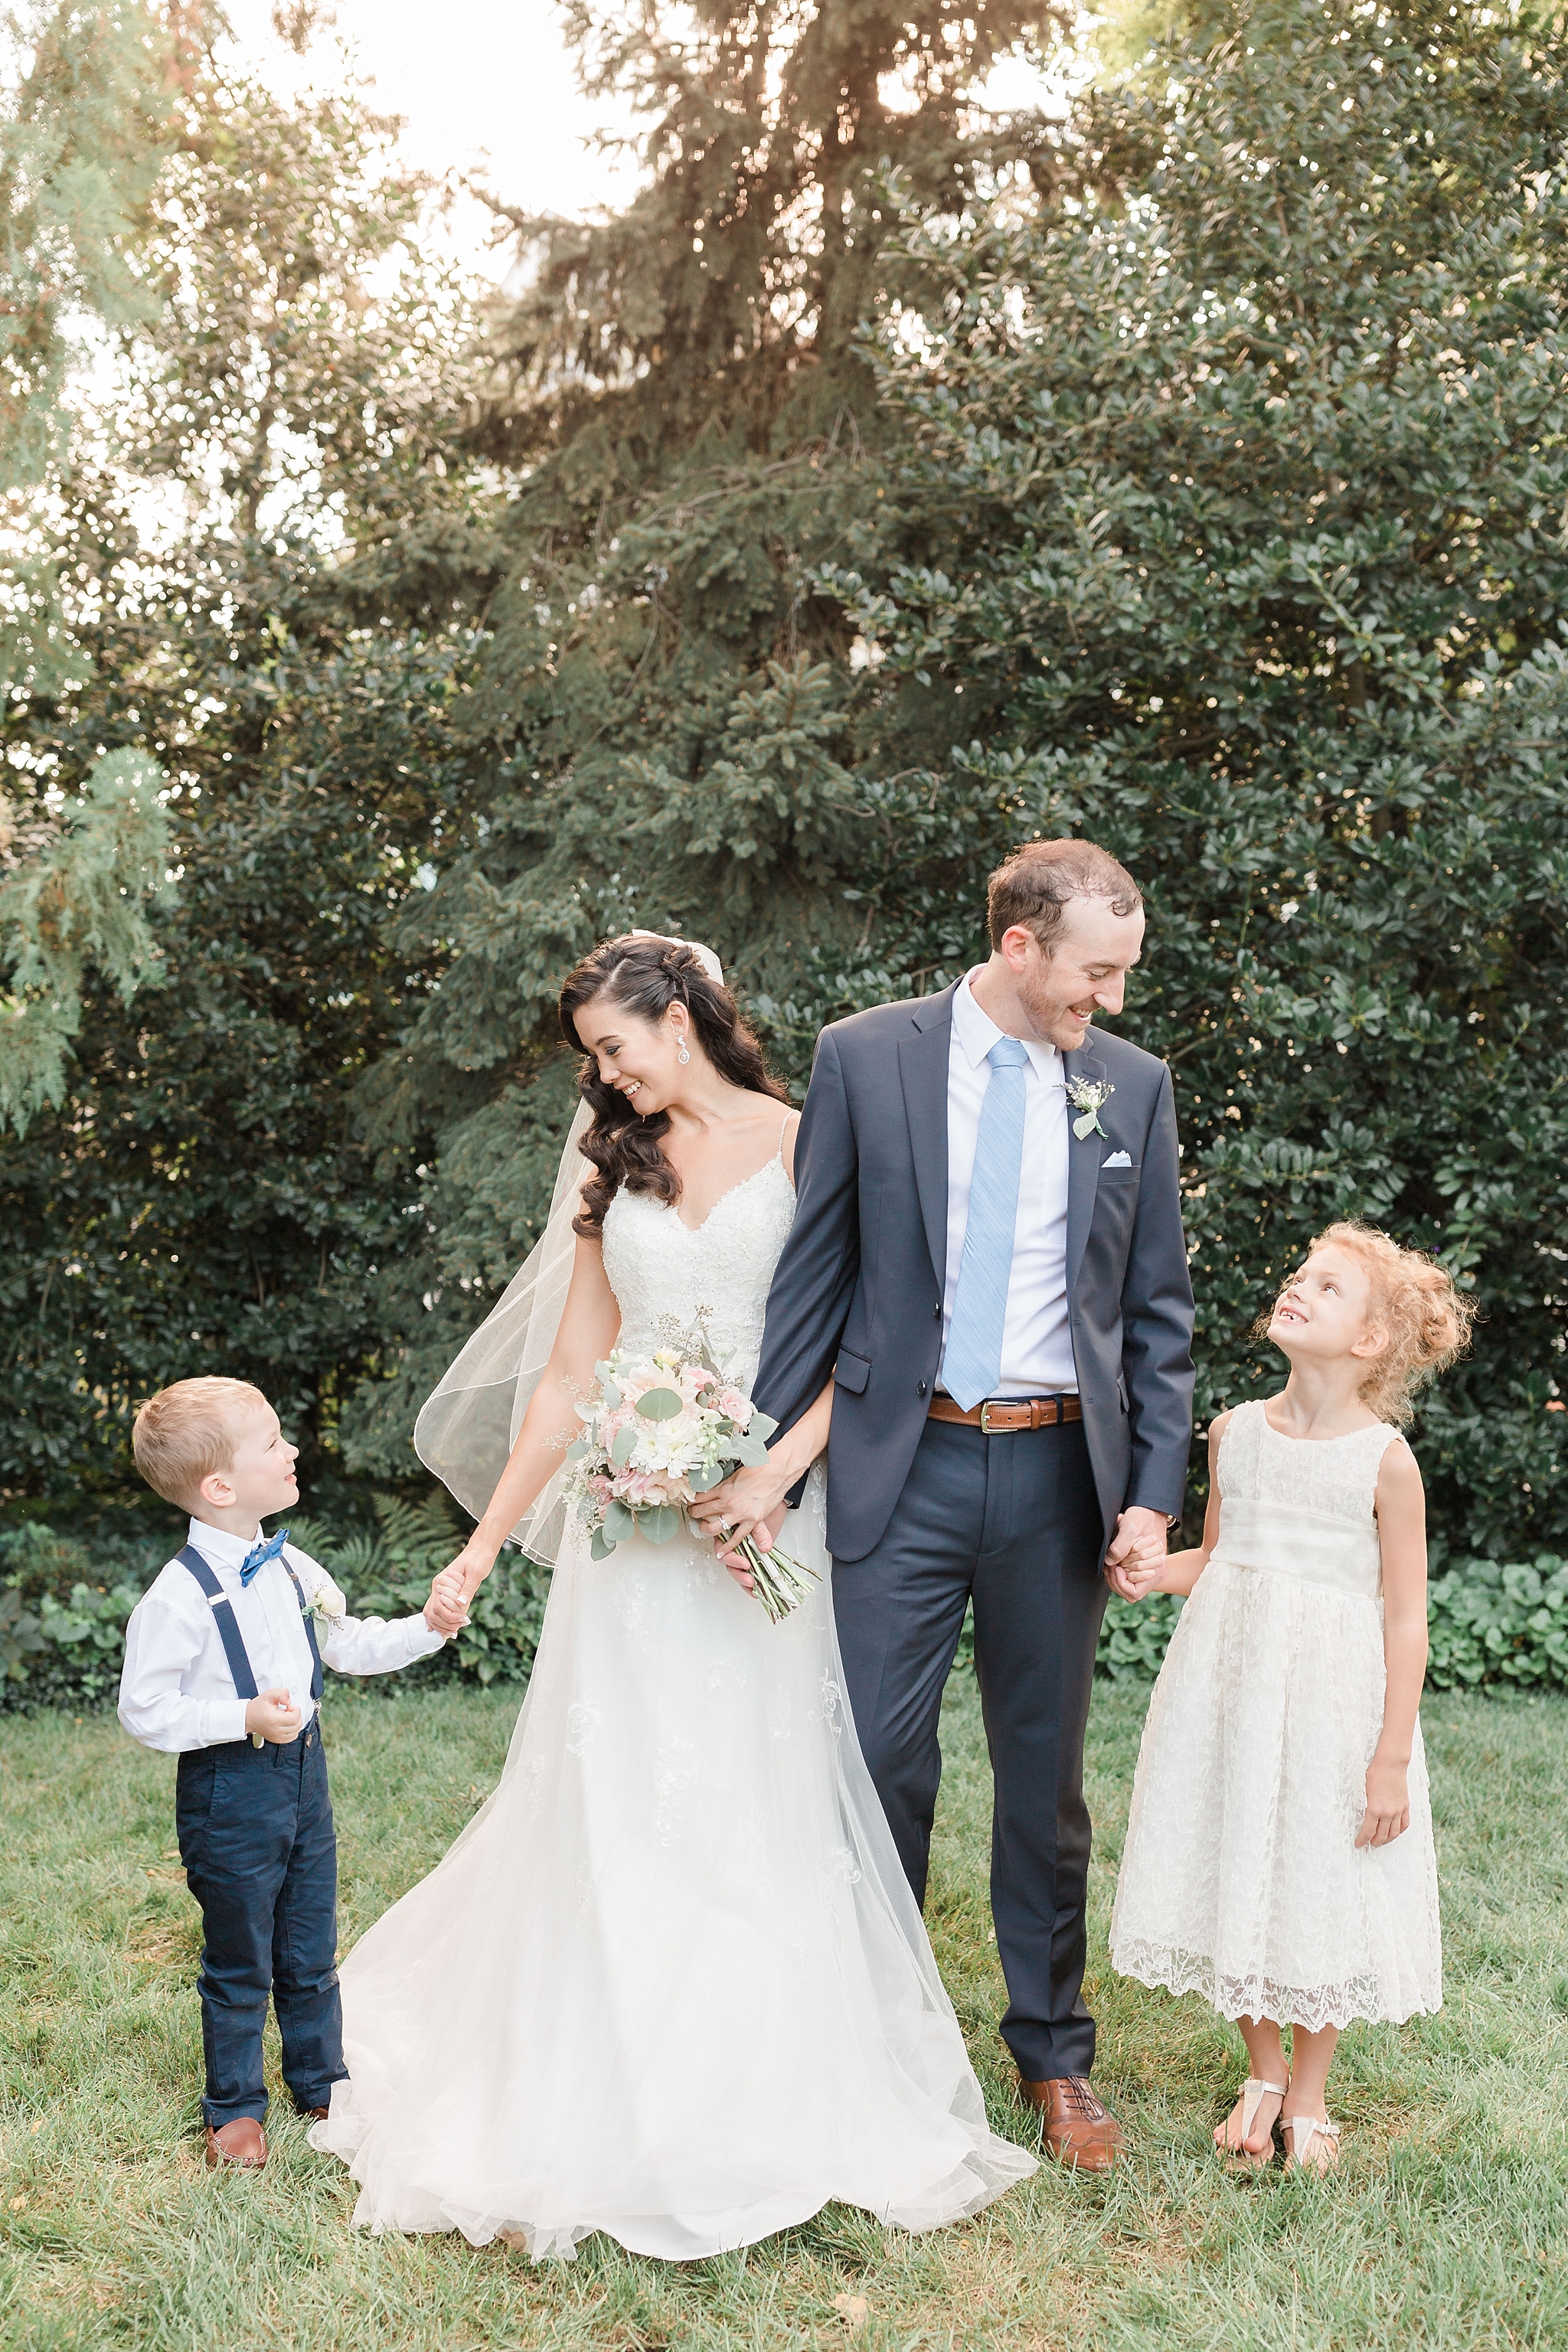 This elegant fall wedding at the Thomas Birkby House in Leesburg, VA was complete with vintage furniture and blush details. 